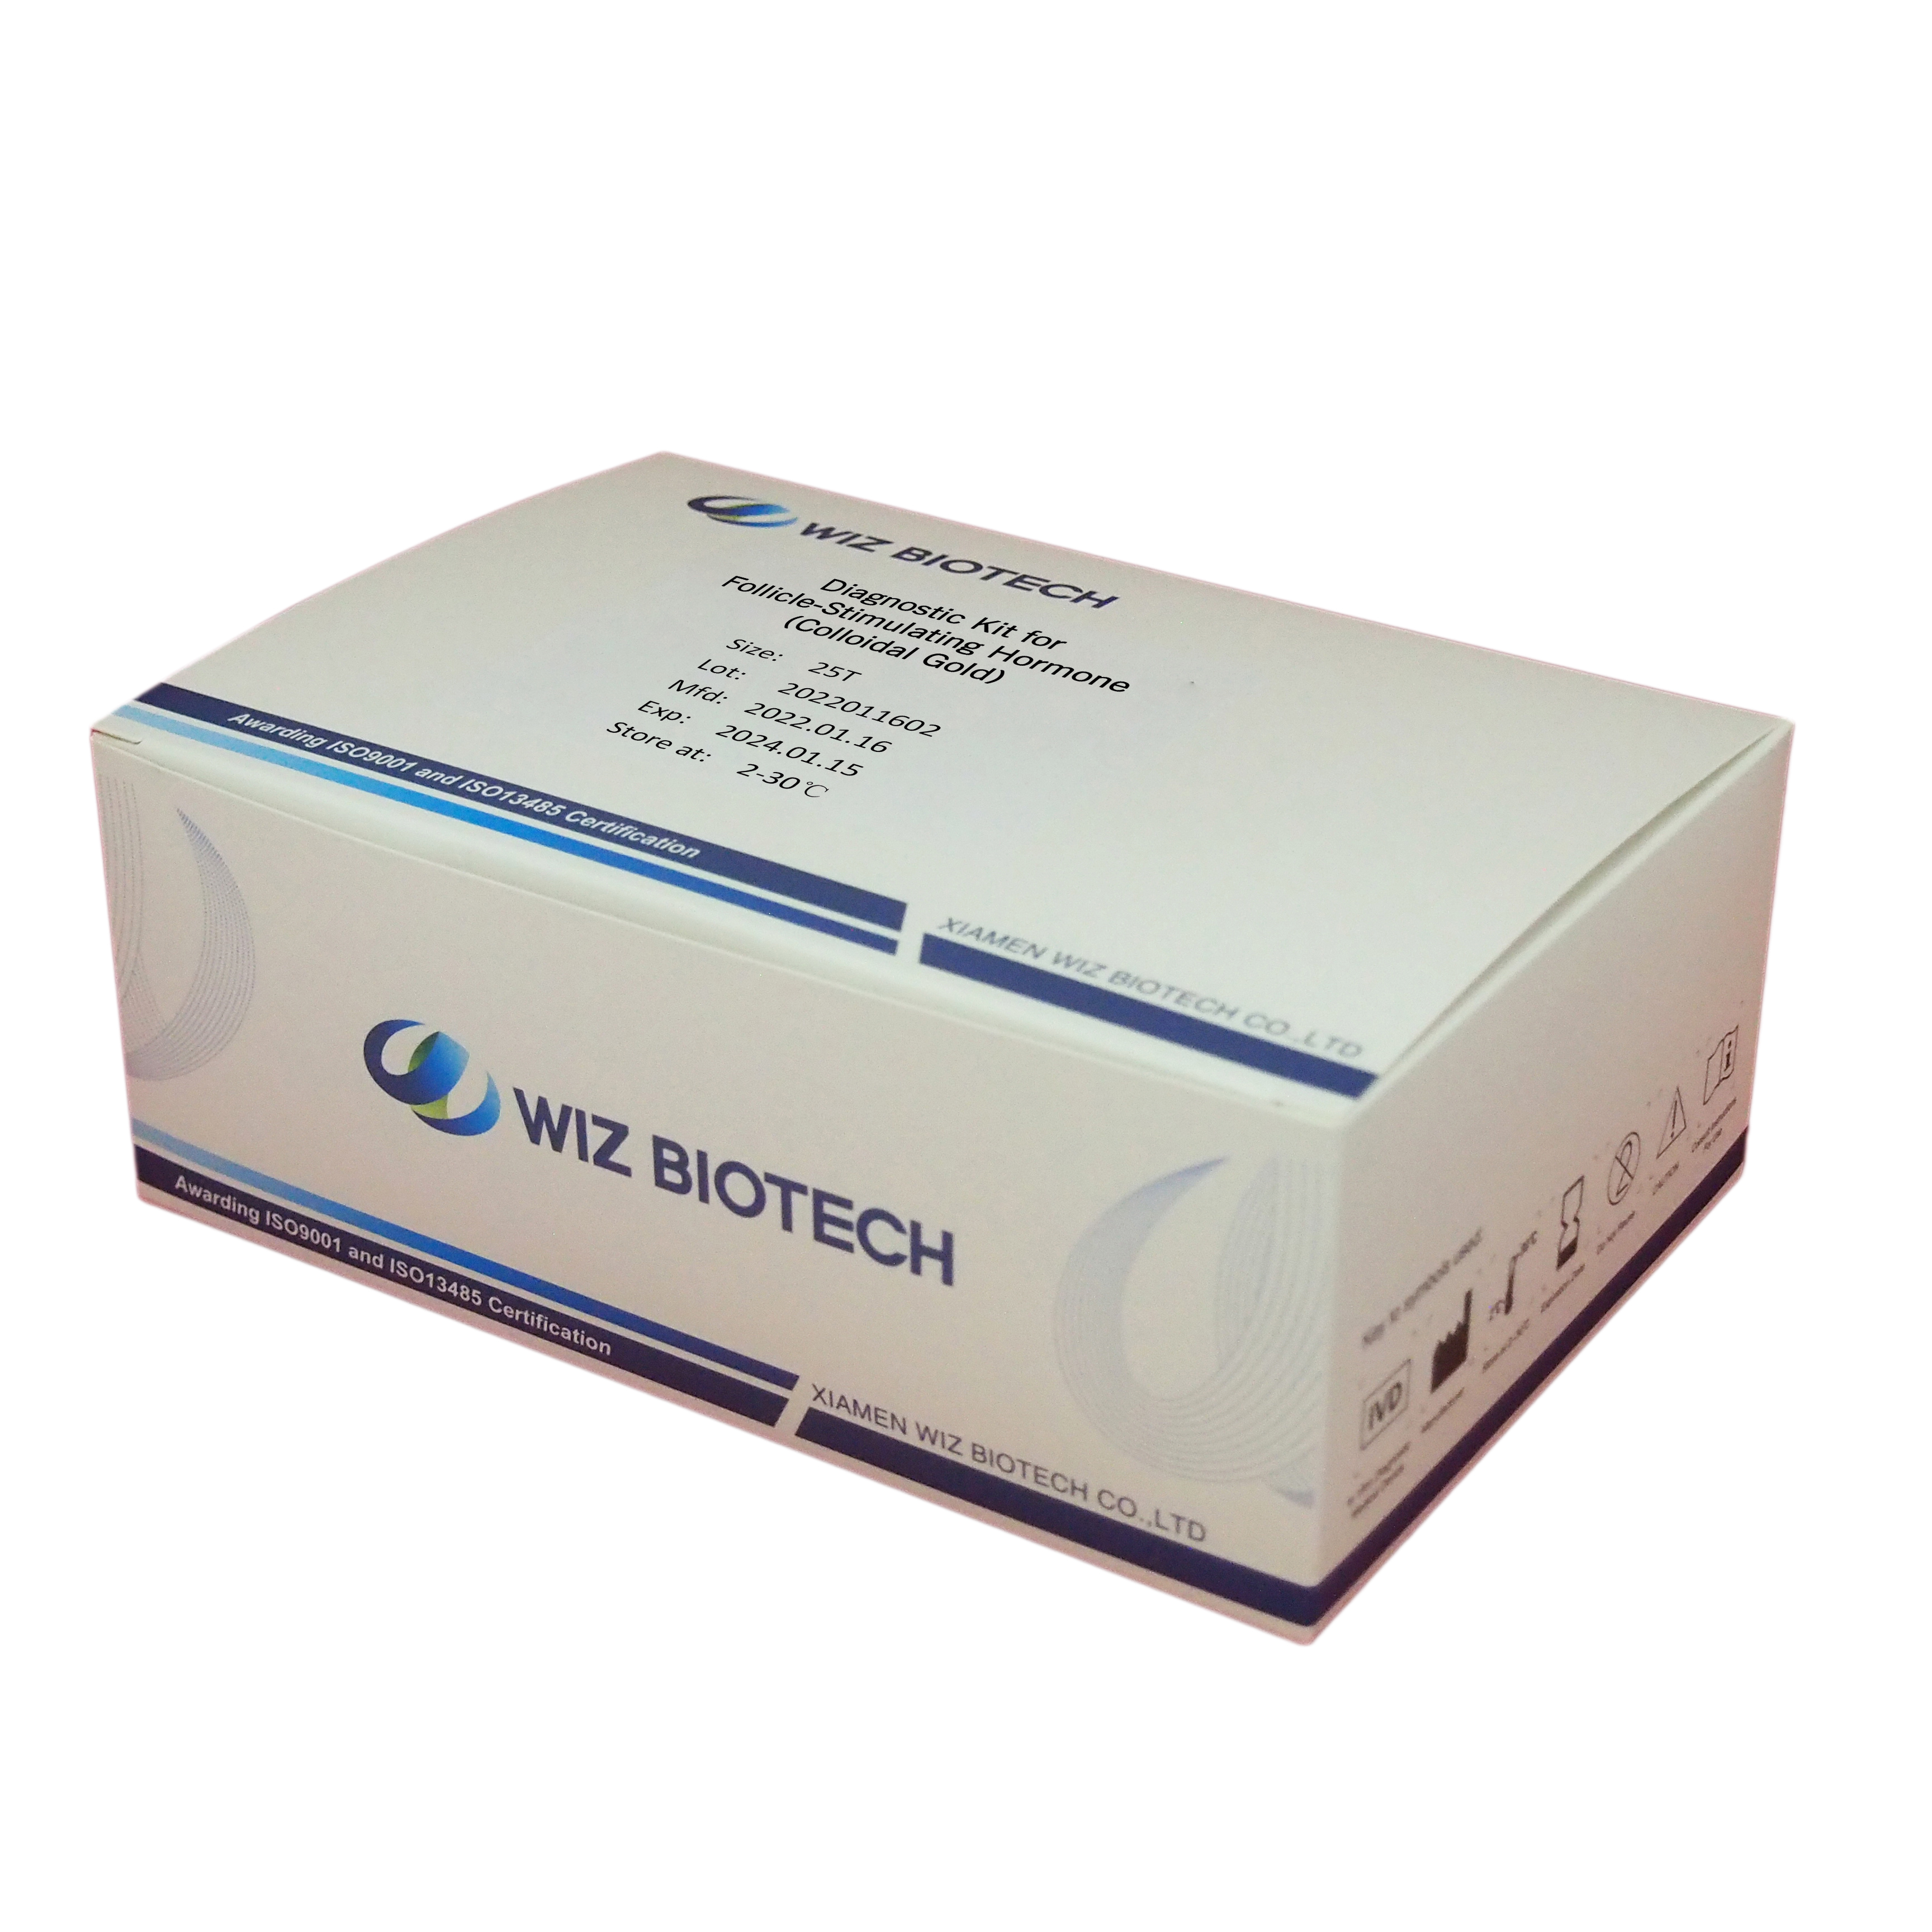 Big discounting Fob (Fecal Occult Blood) - Diagnostic kit for Follicle Stimulating Hormone Colloidal Gold – Baysen